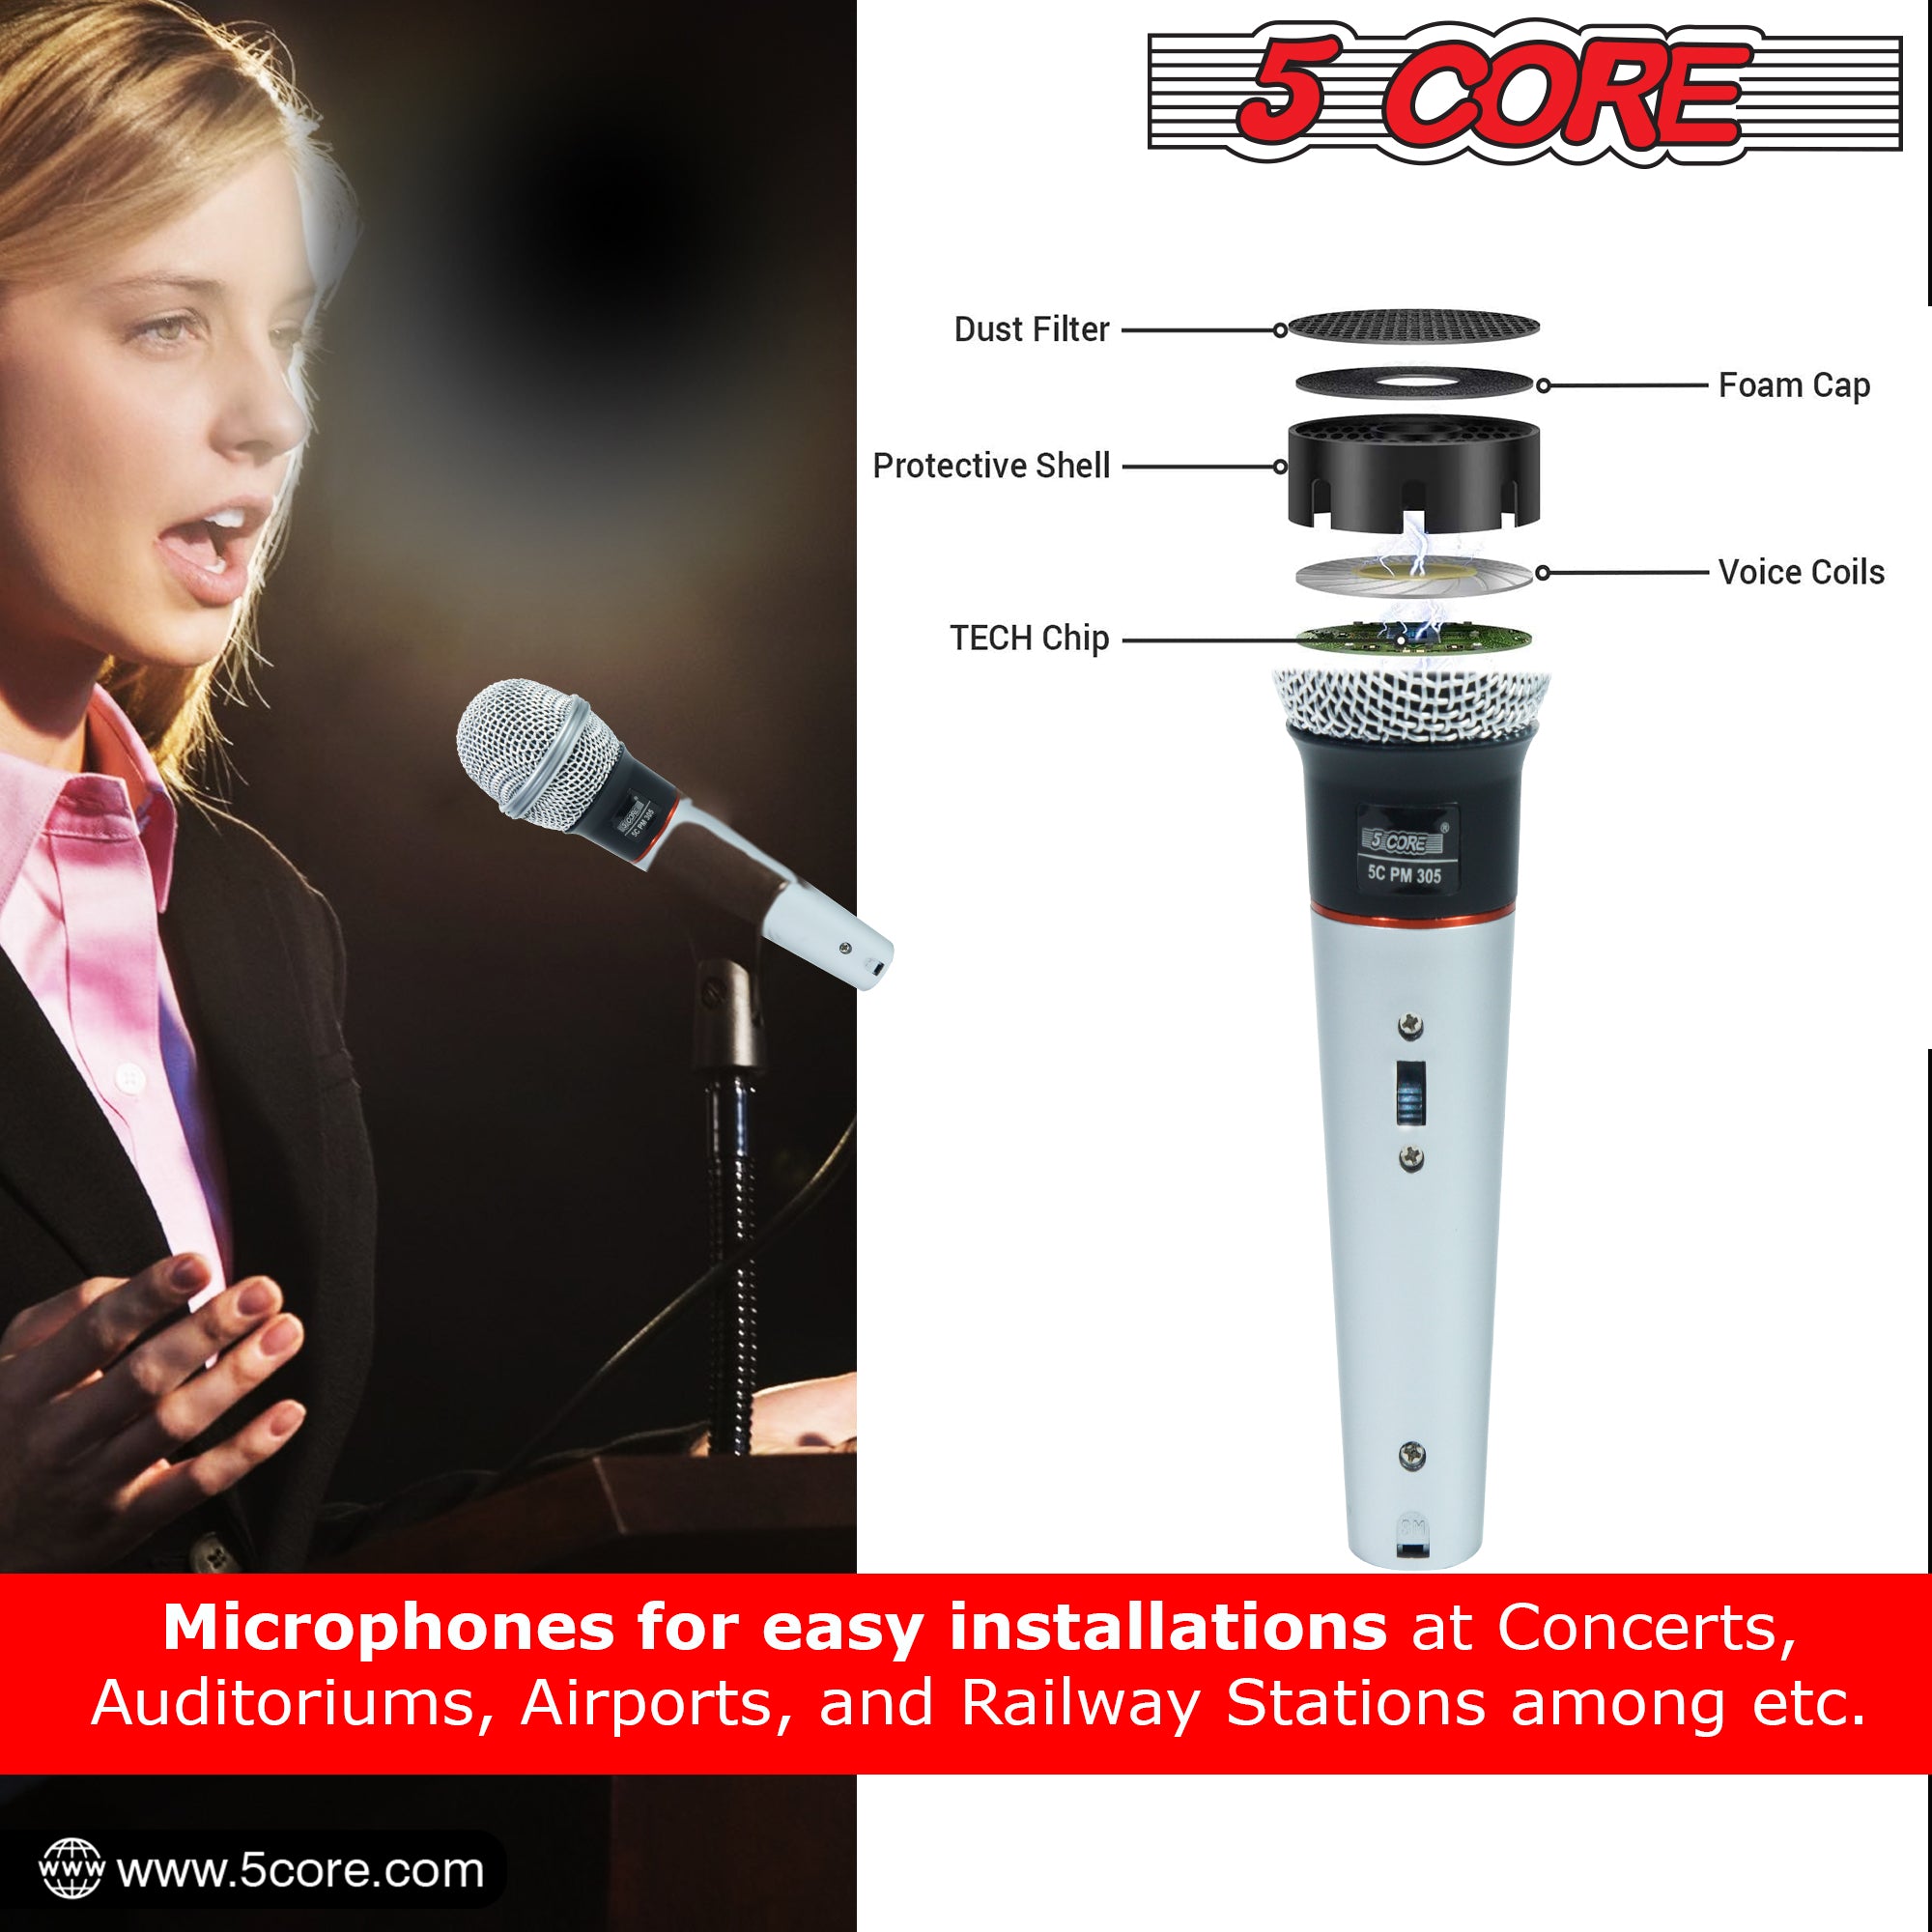 Experience Clear and Crisp Vocals with 5 Core's PM 305 Microphone